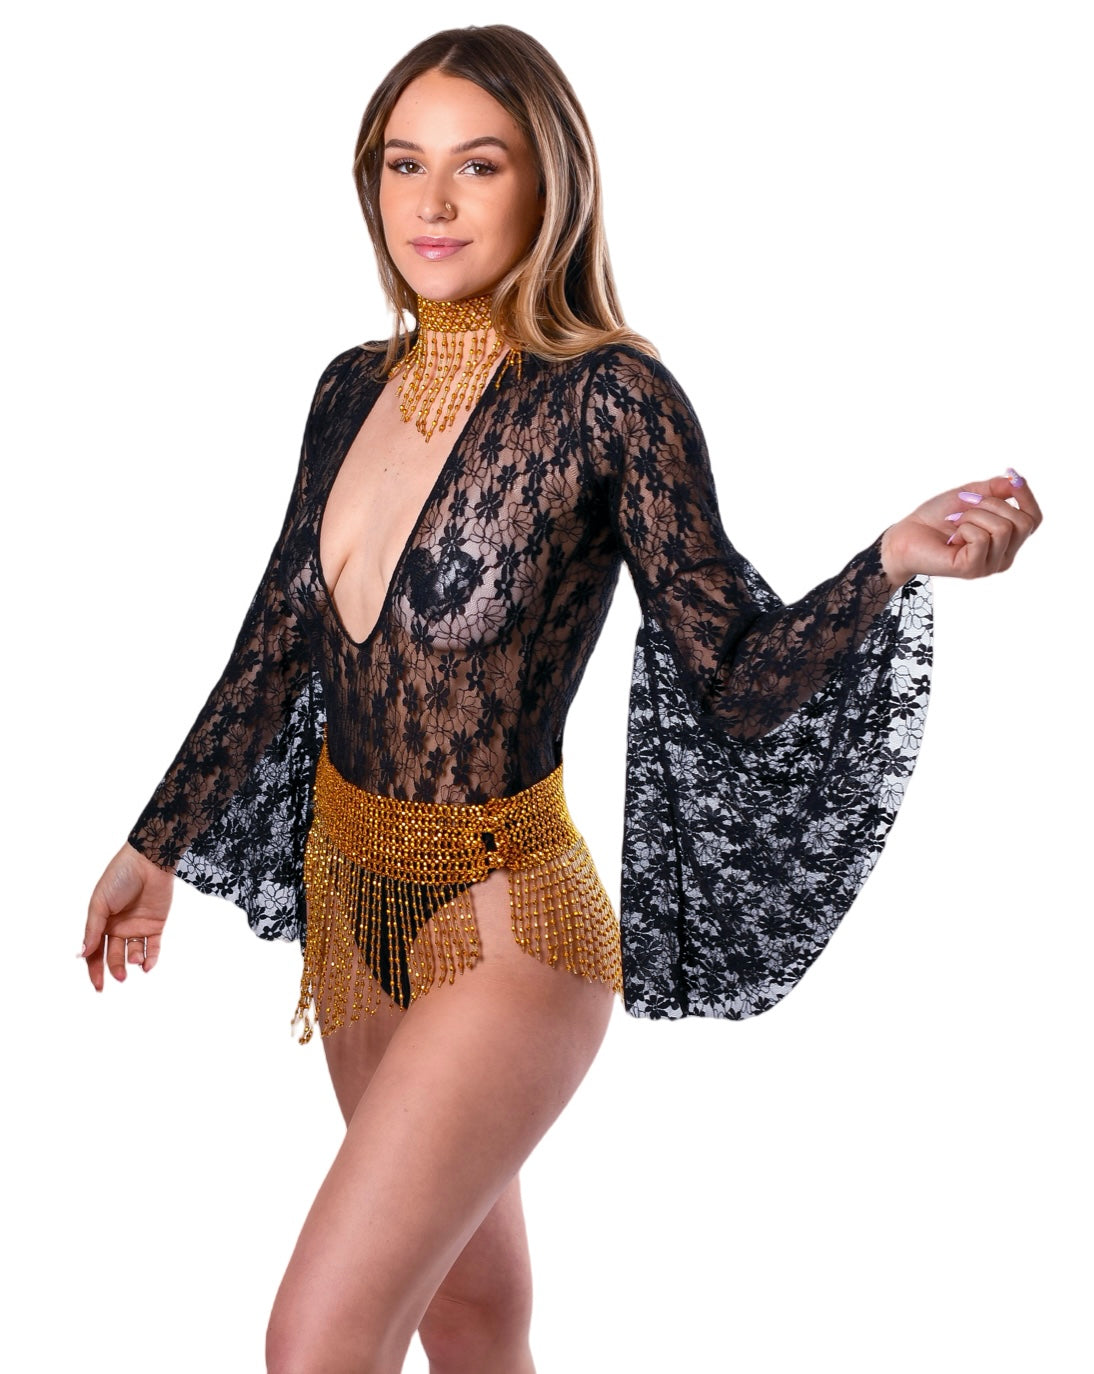 Black Lace Bell Sleeve Bodysuit - Black Lace Bodysuit - Black long Sle – By  Order Of The Queen